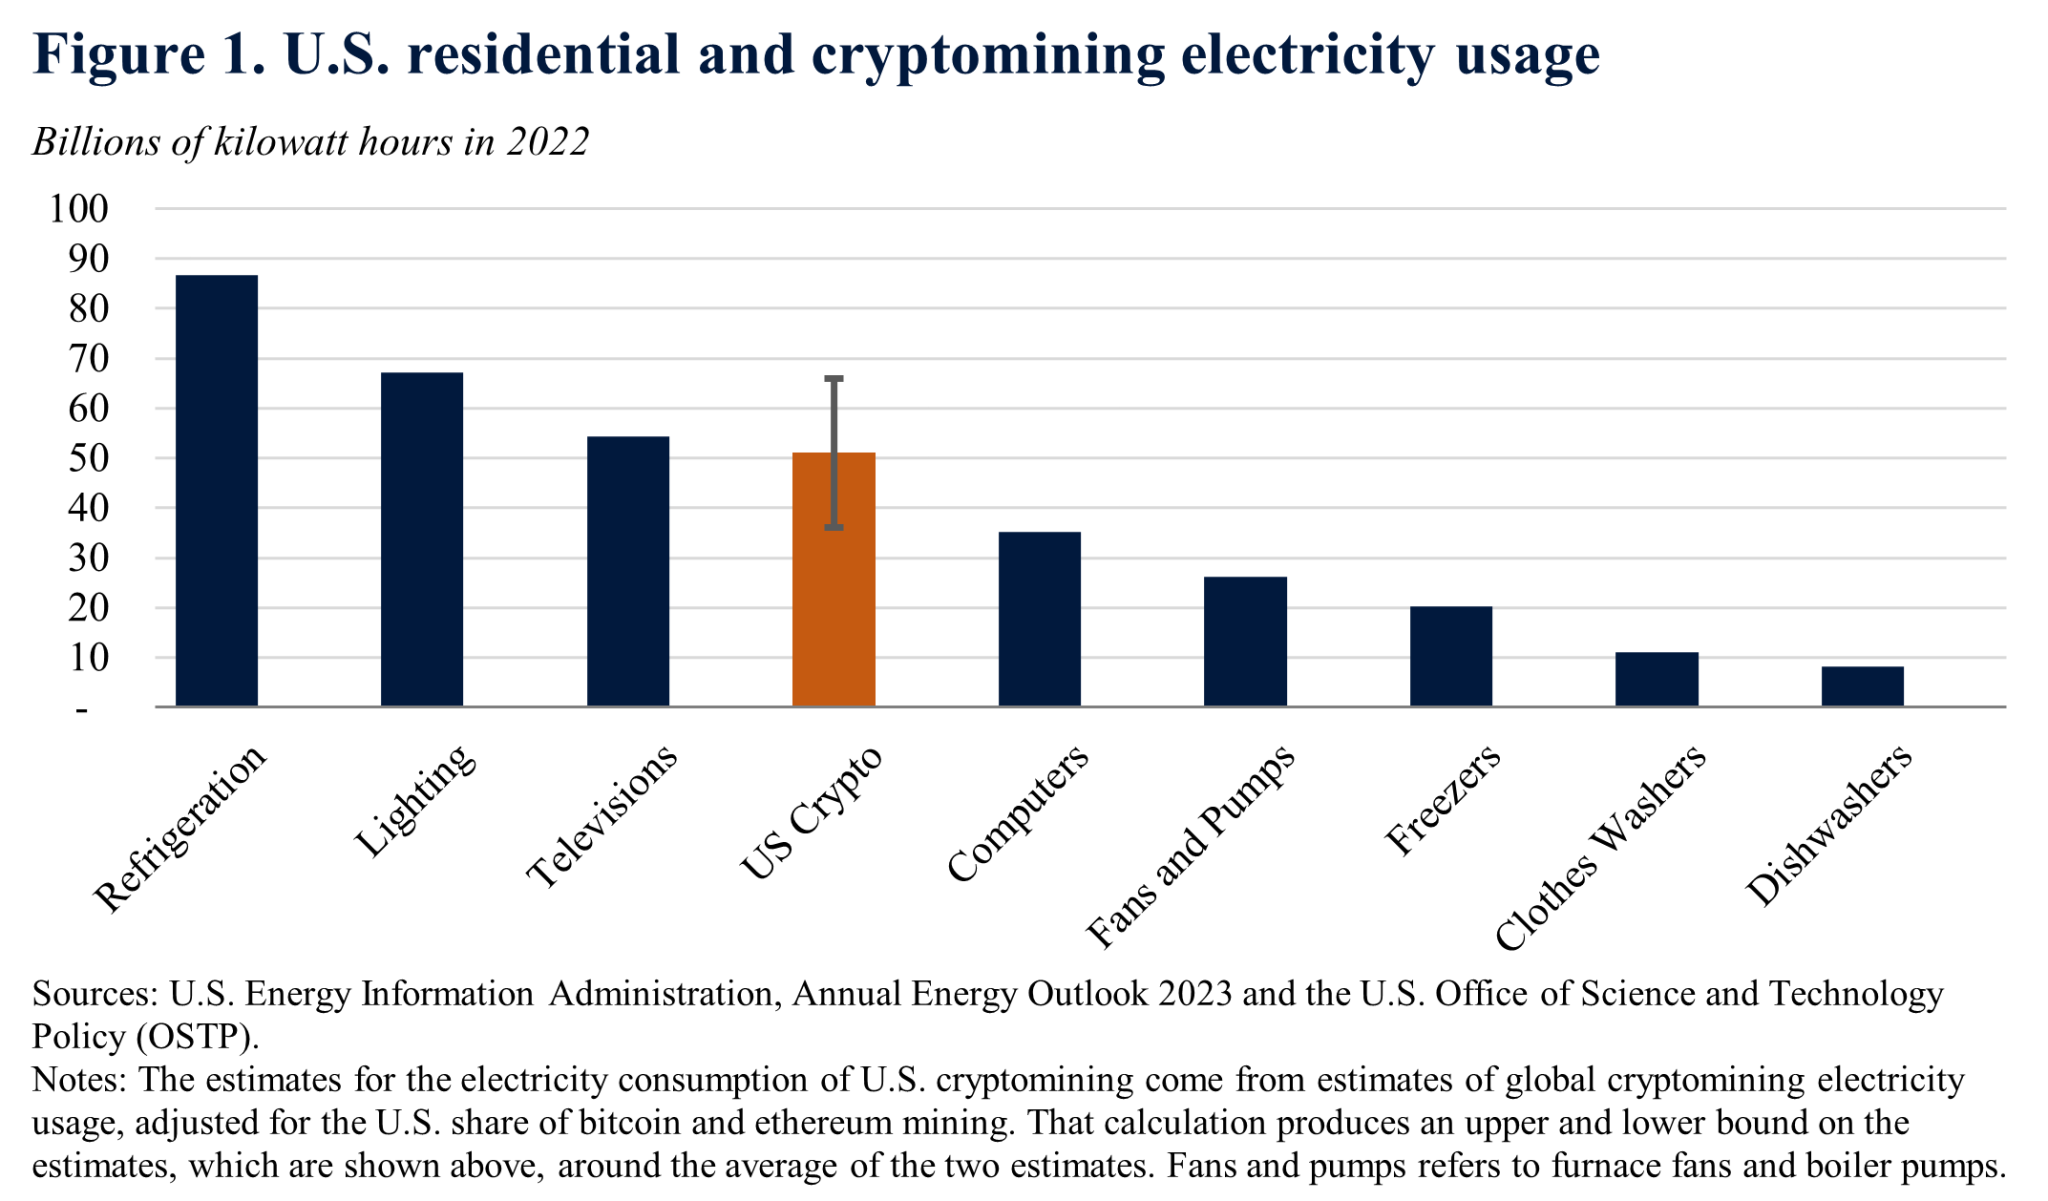 US Residential and cryptomining electricity usage